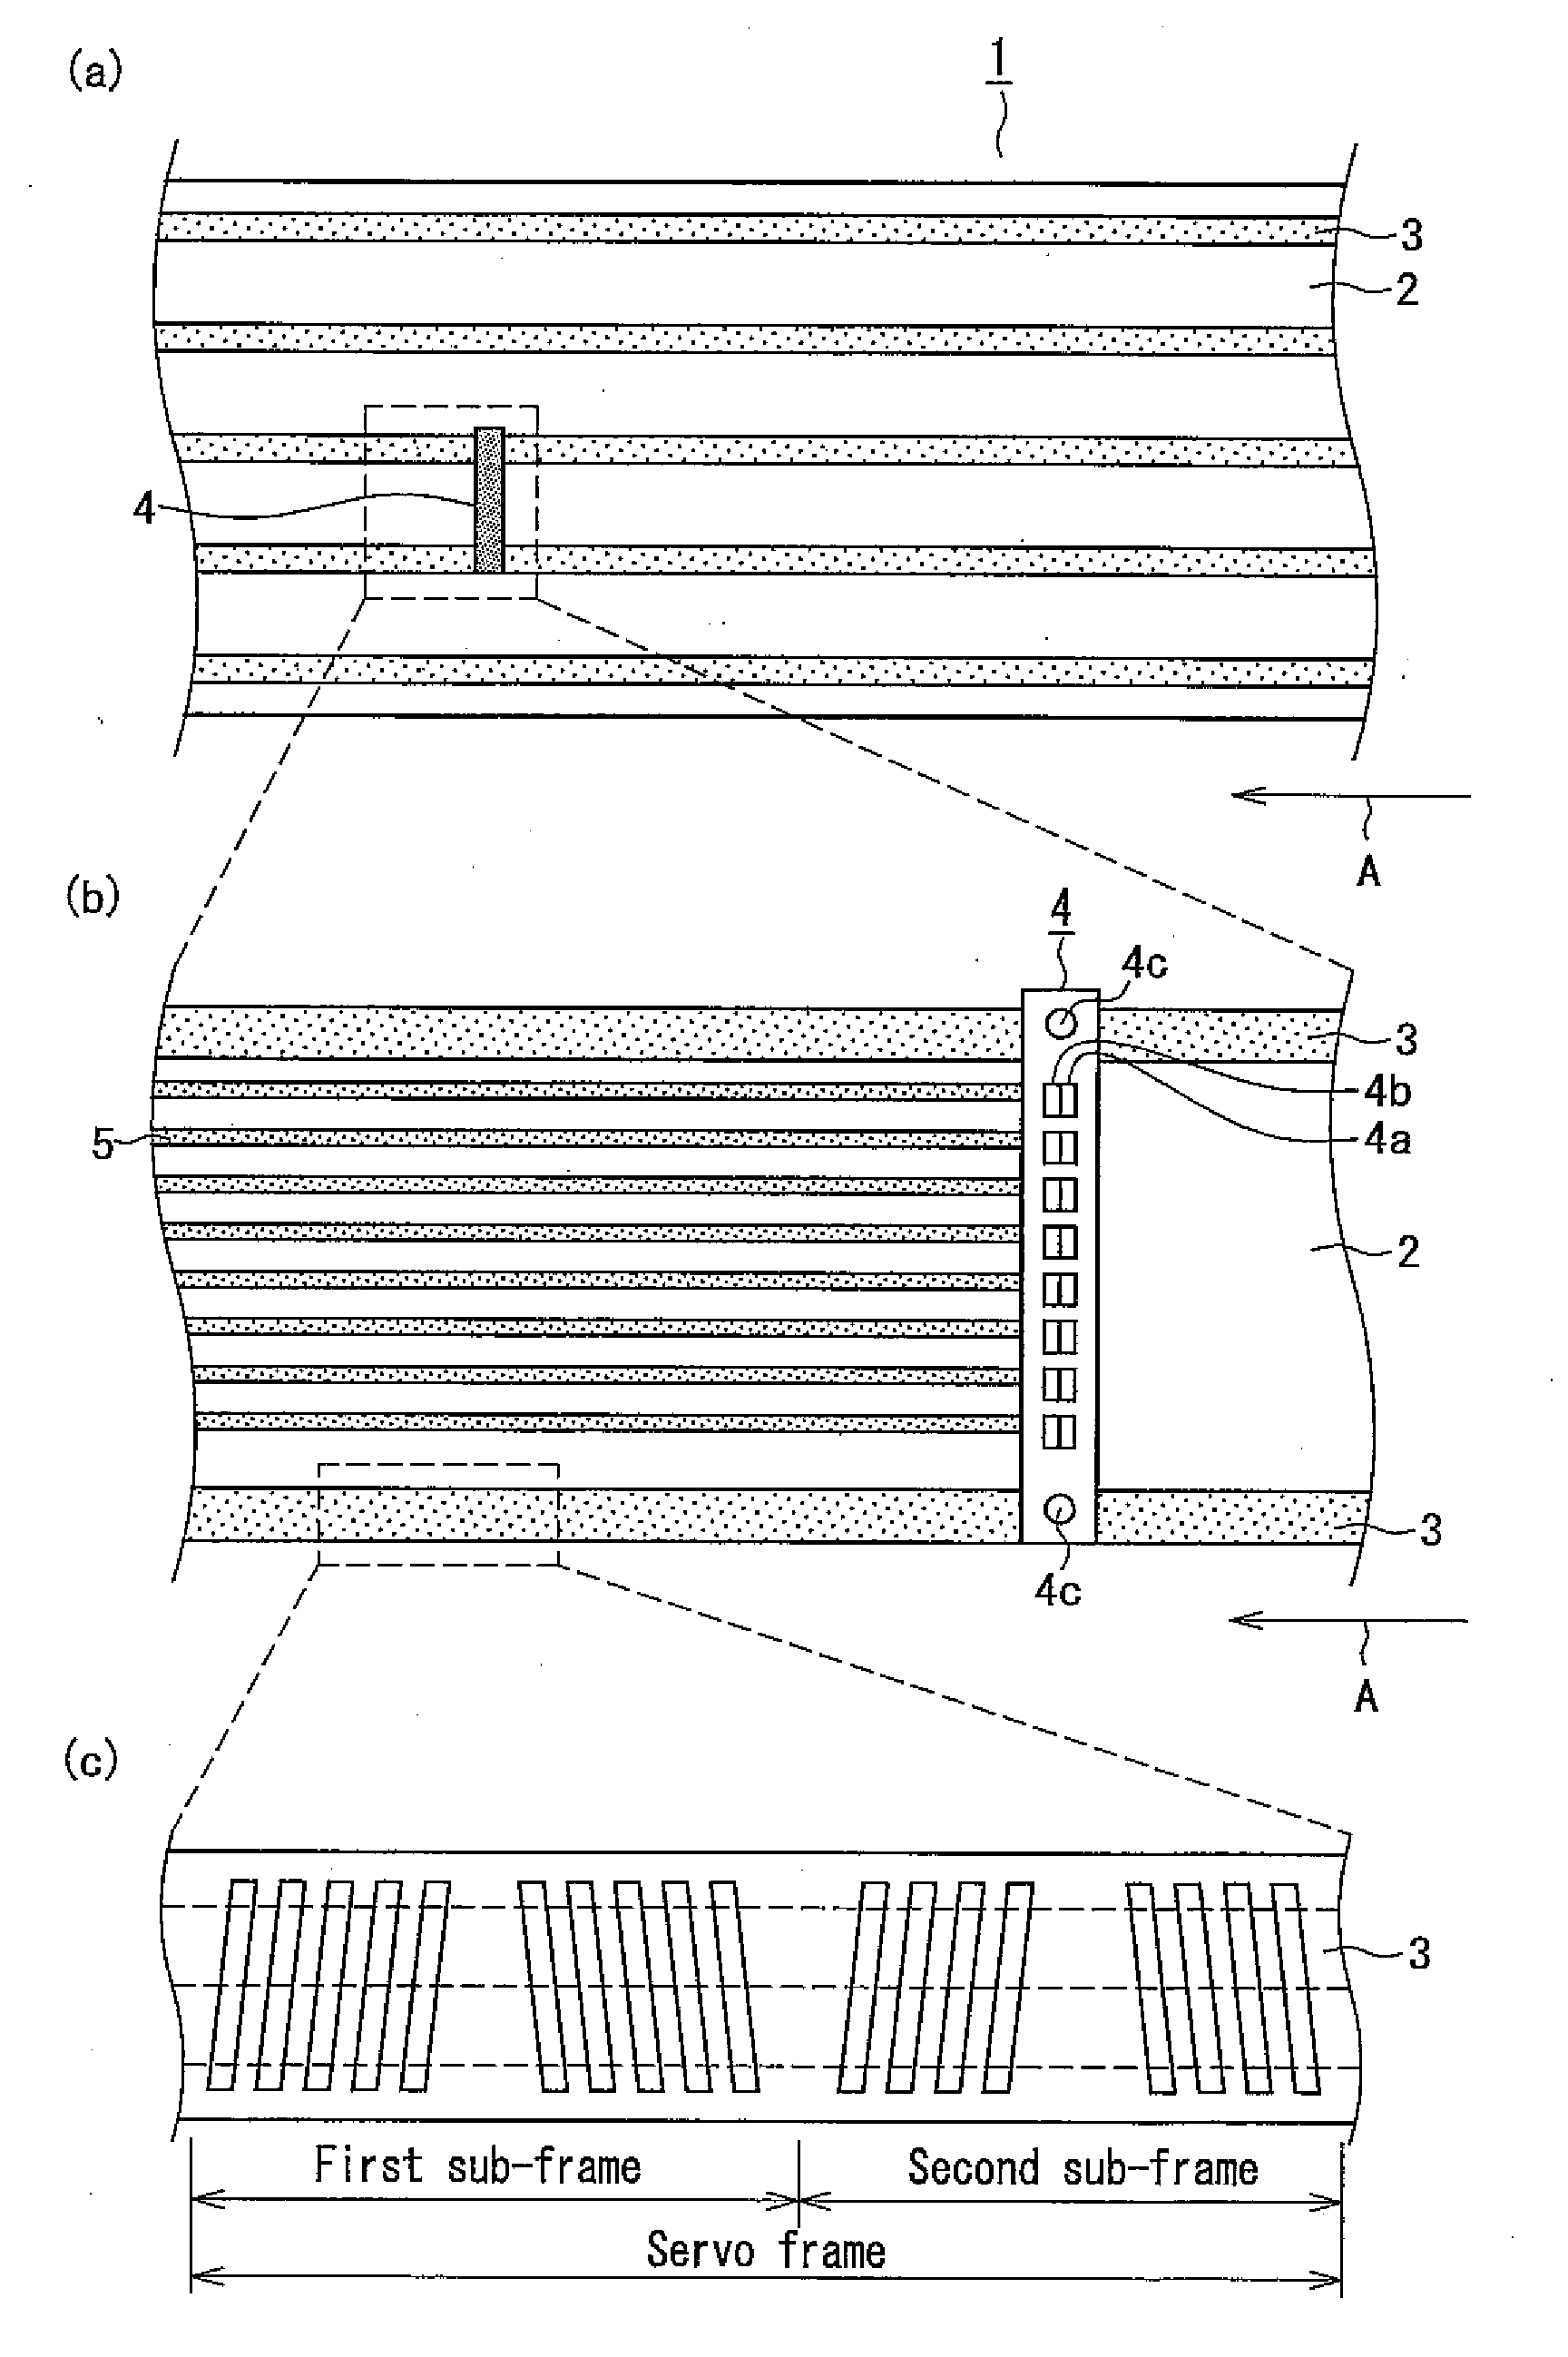 Servo controlling method, recording/reproducing apparatus, magnetic tape, and magnetic tape cartridge